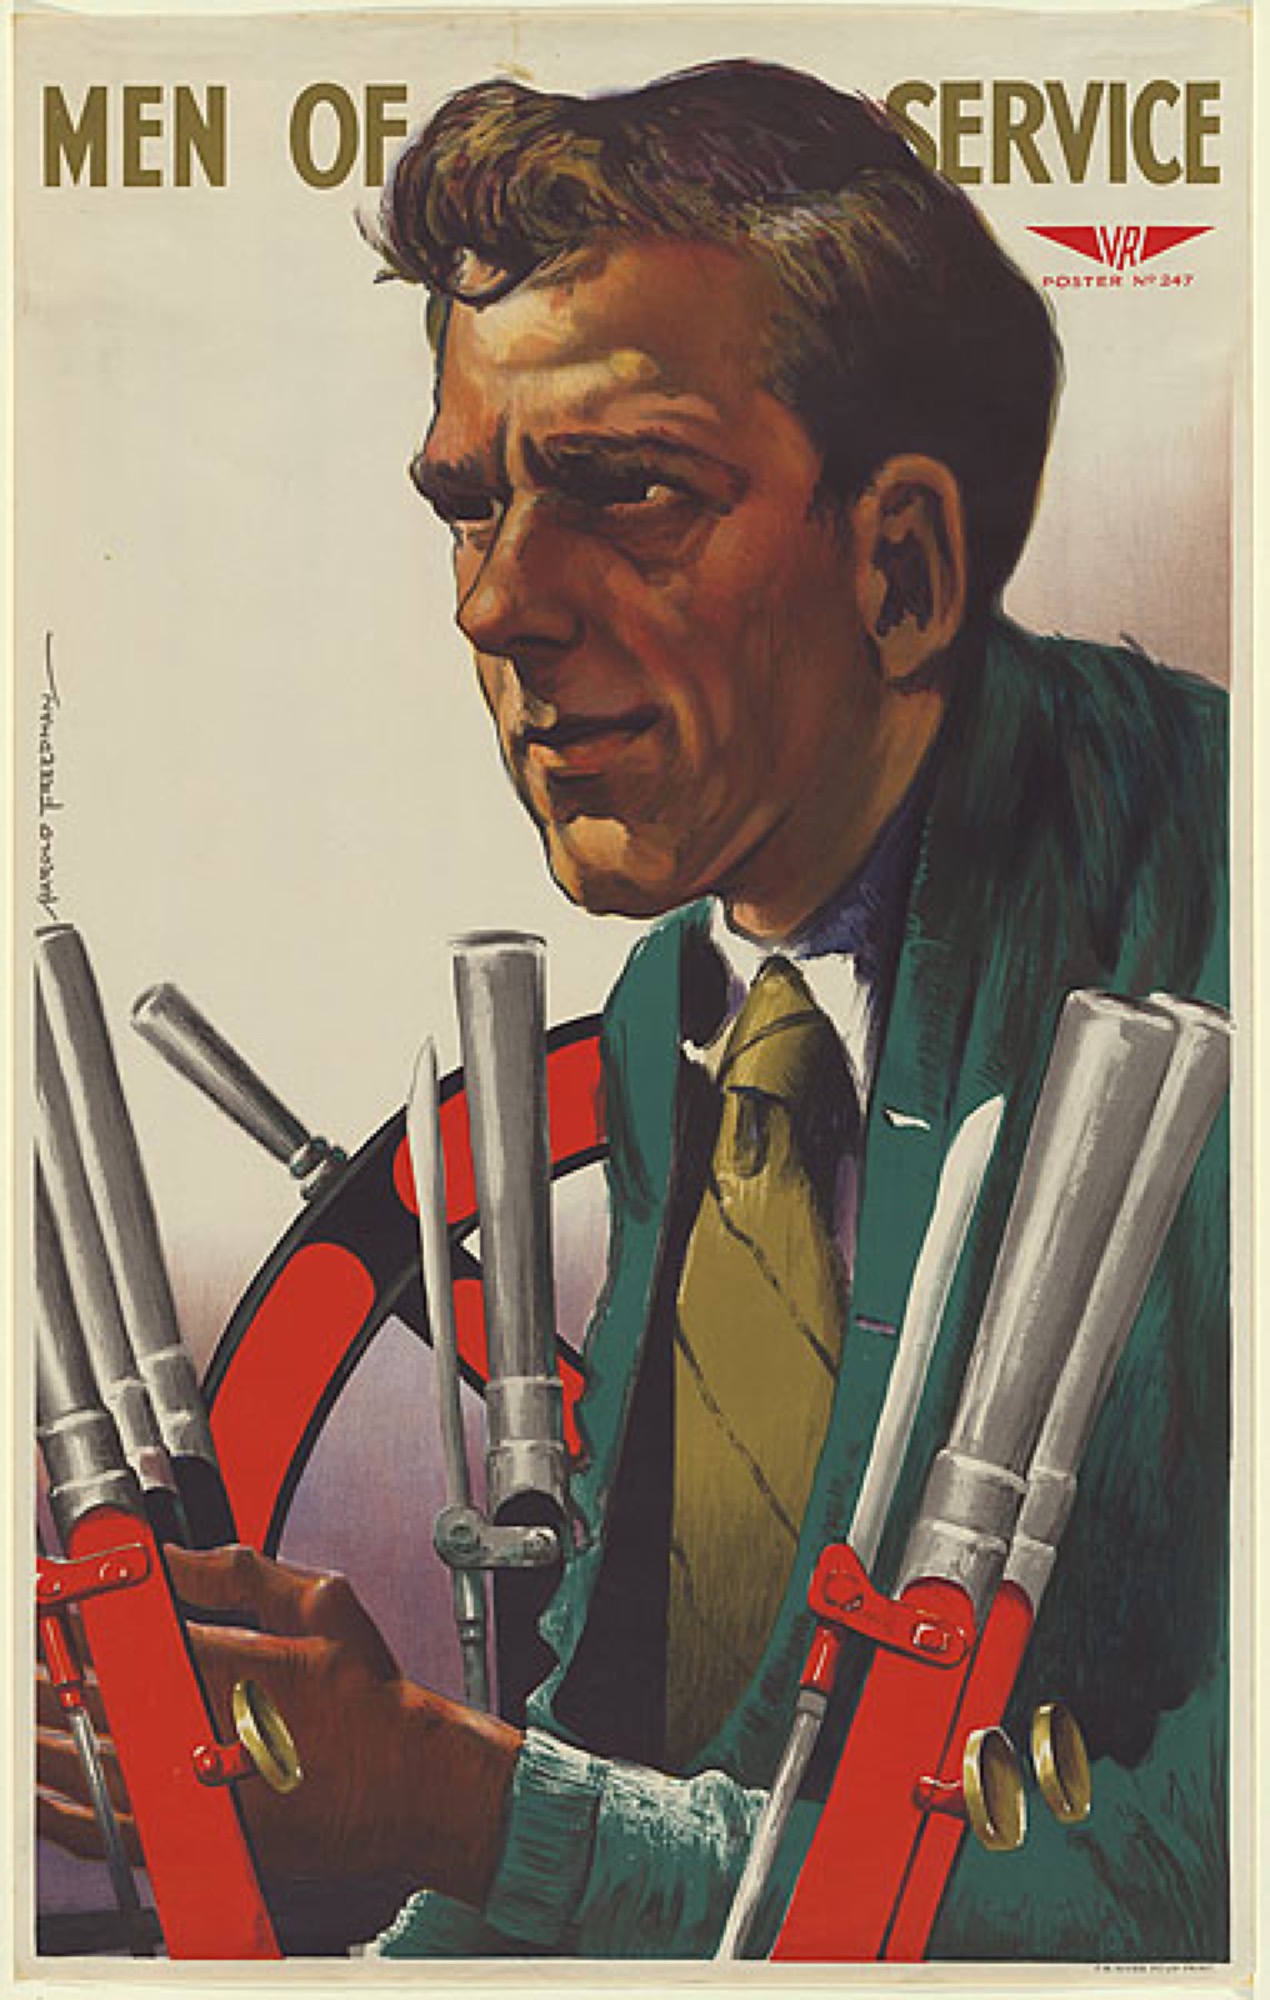 <em>Men of Service: The Signal Man</em>, 1947, lithograph, printed in colour inks, from multiple plates, 99.5 x 61.5 cm (printed image), Collection: National Gallery of Australia, Canberra